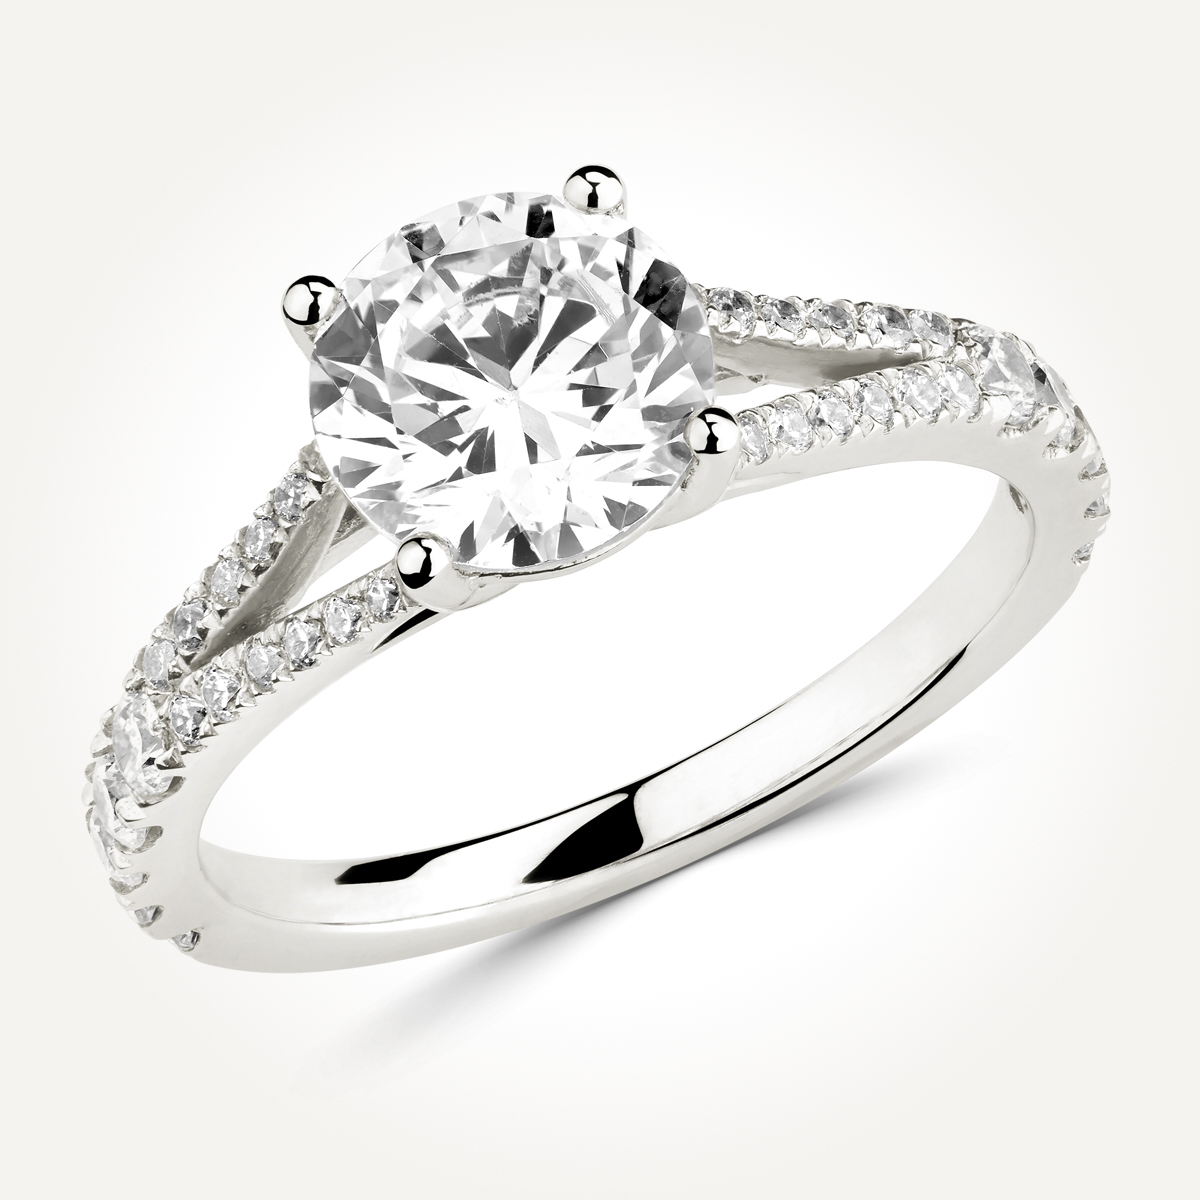 Unique 14kt white gold diamond flower, leaf and vine wedding  ring,engagement ring with a Forever One Moissanite center stone ADLR238